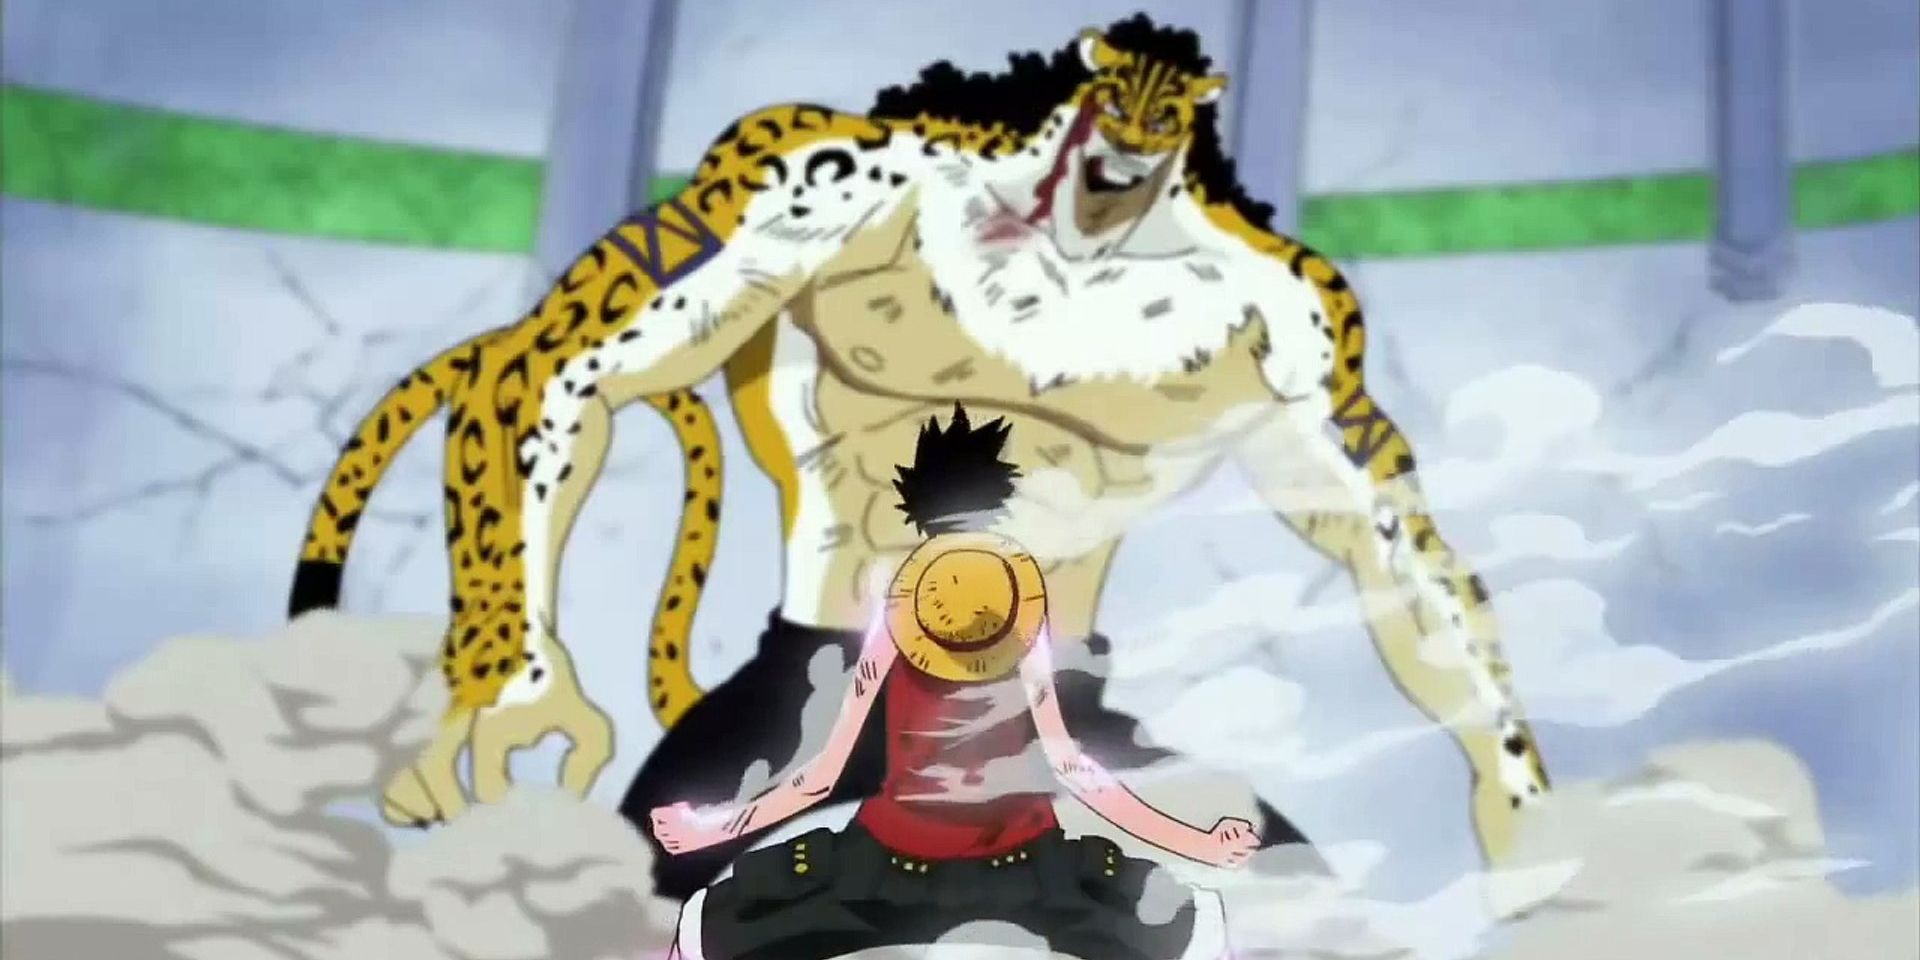 One Piece Luffy Fighting Lucci